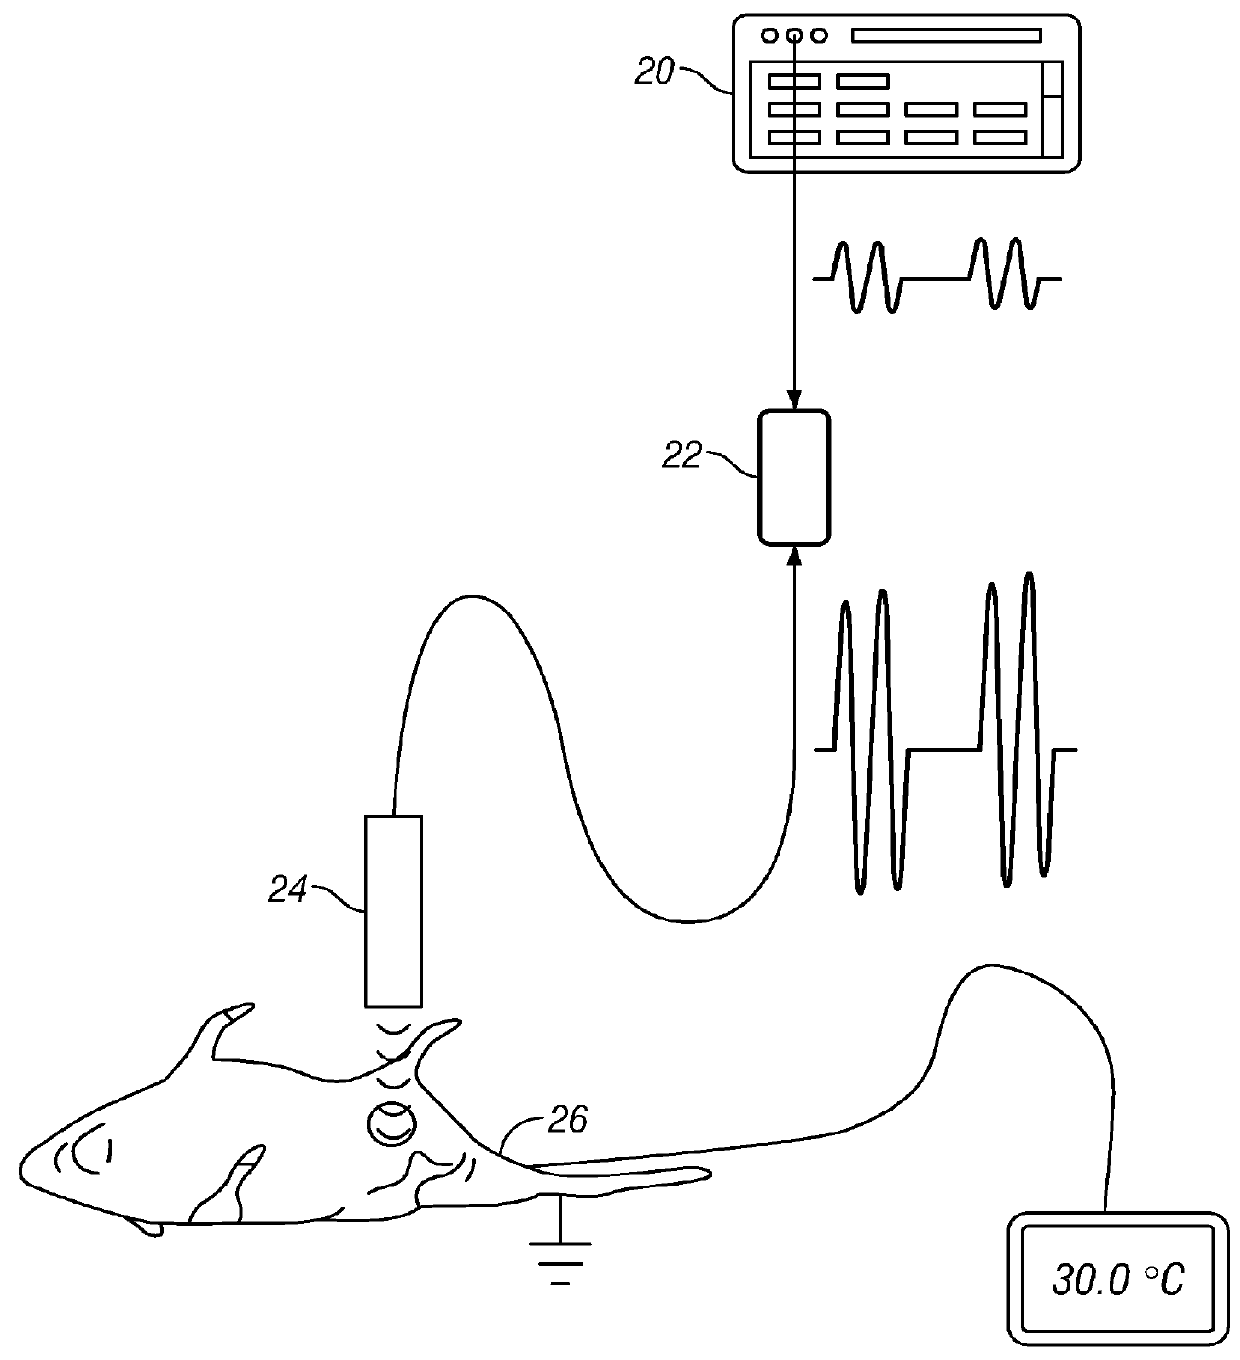 Methods and apparatus for treating a cervix with ultrasound energy